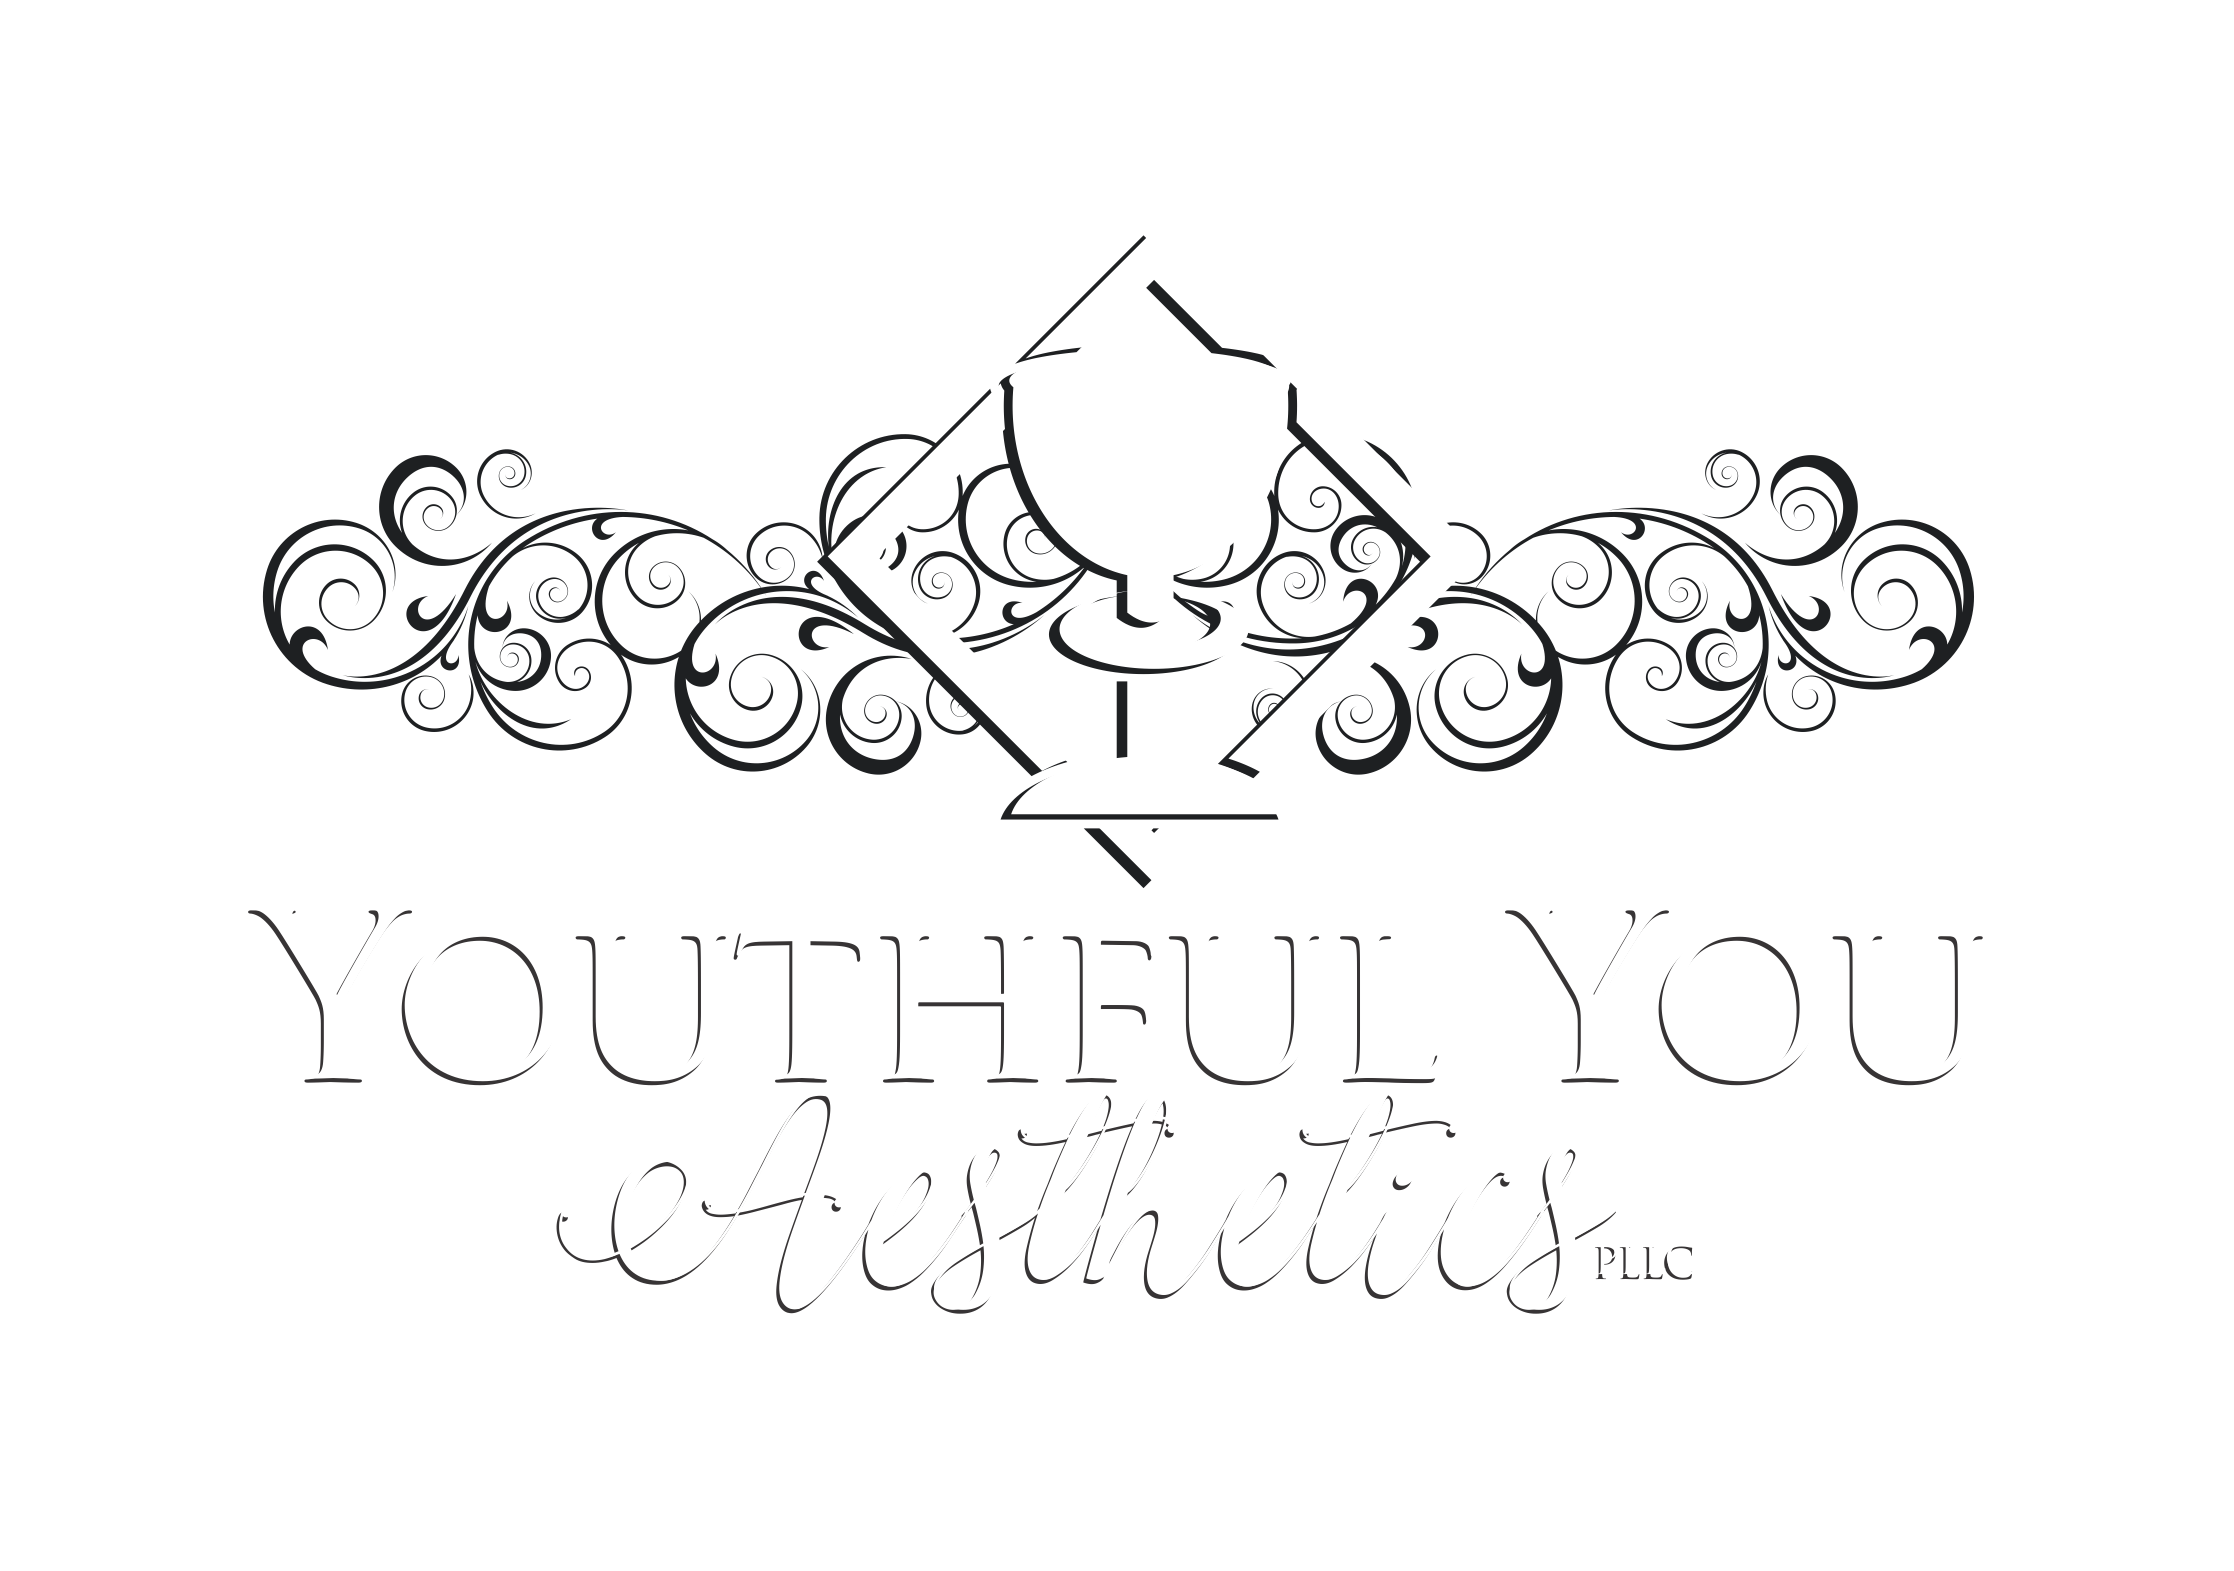 Youth You Aesthetics PLLC